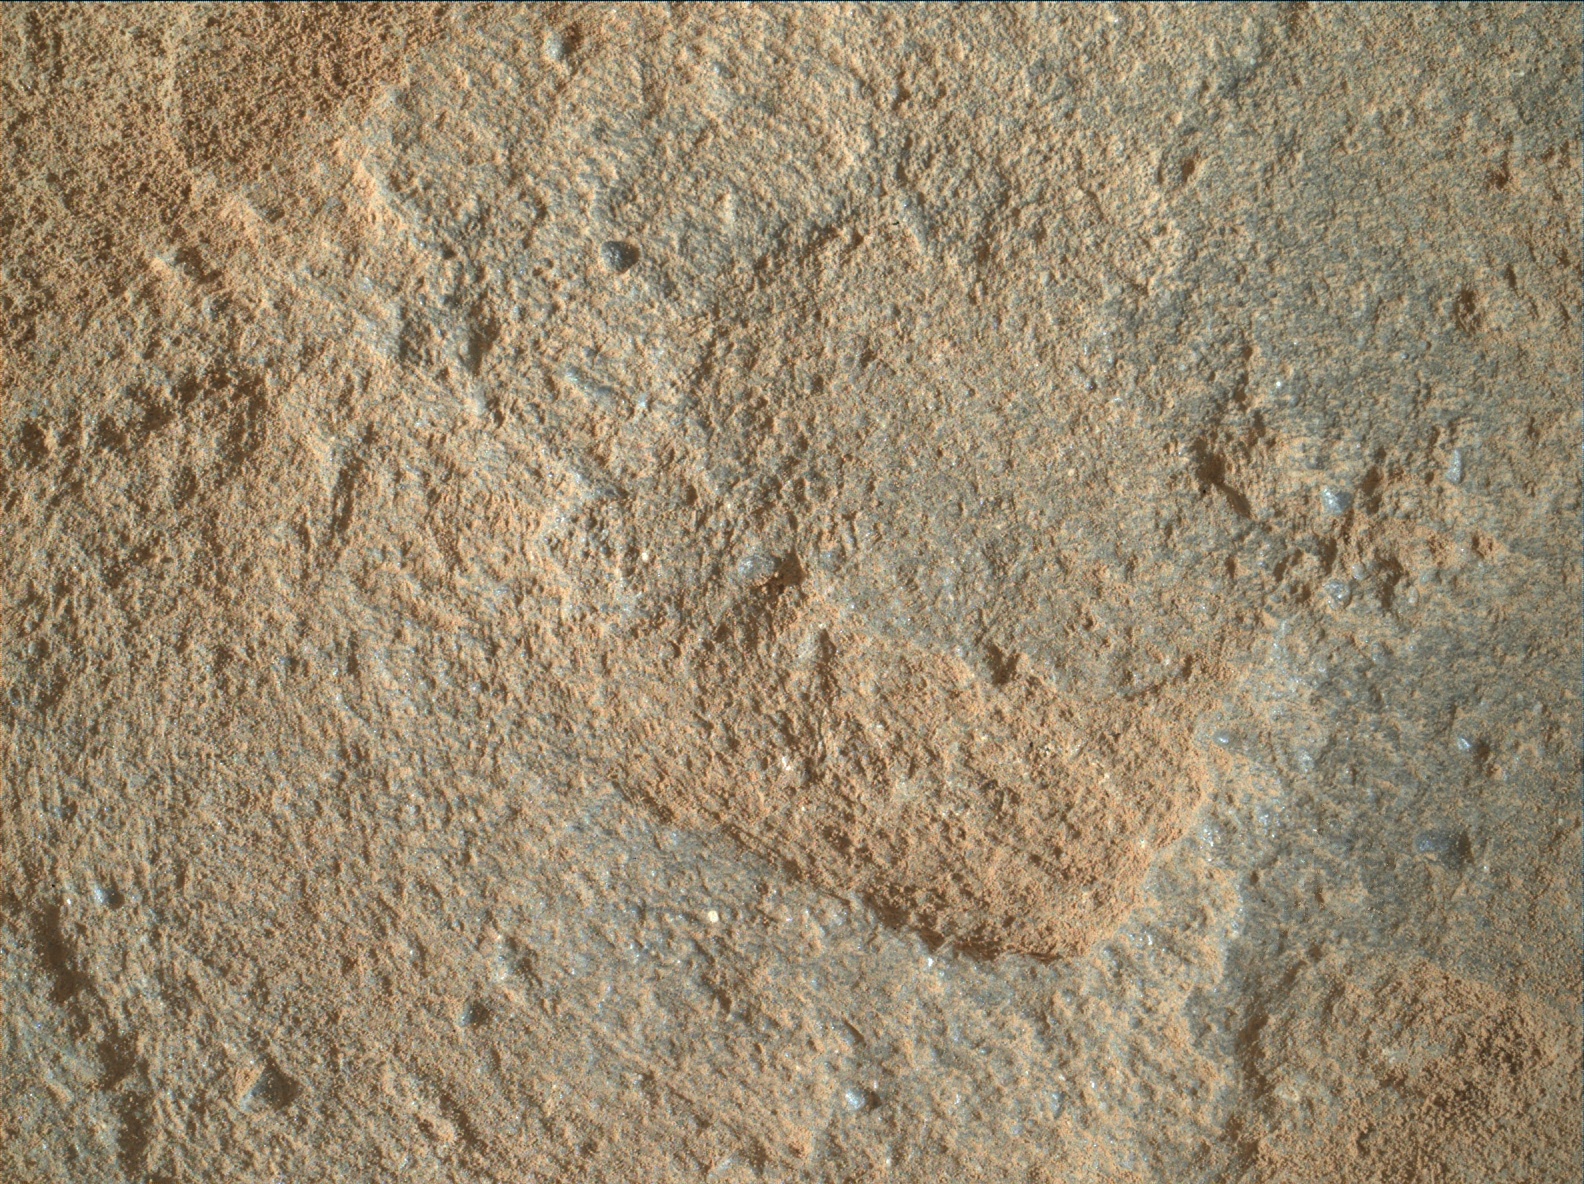 Nasa's Mars rover Curiosity acquired this image using its Mars Hand Lens Imager (MAHLI) on Sol 1114